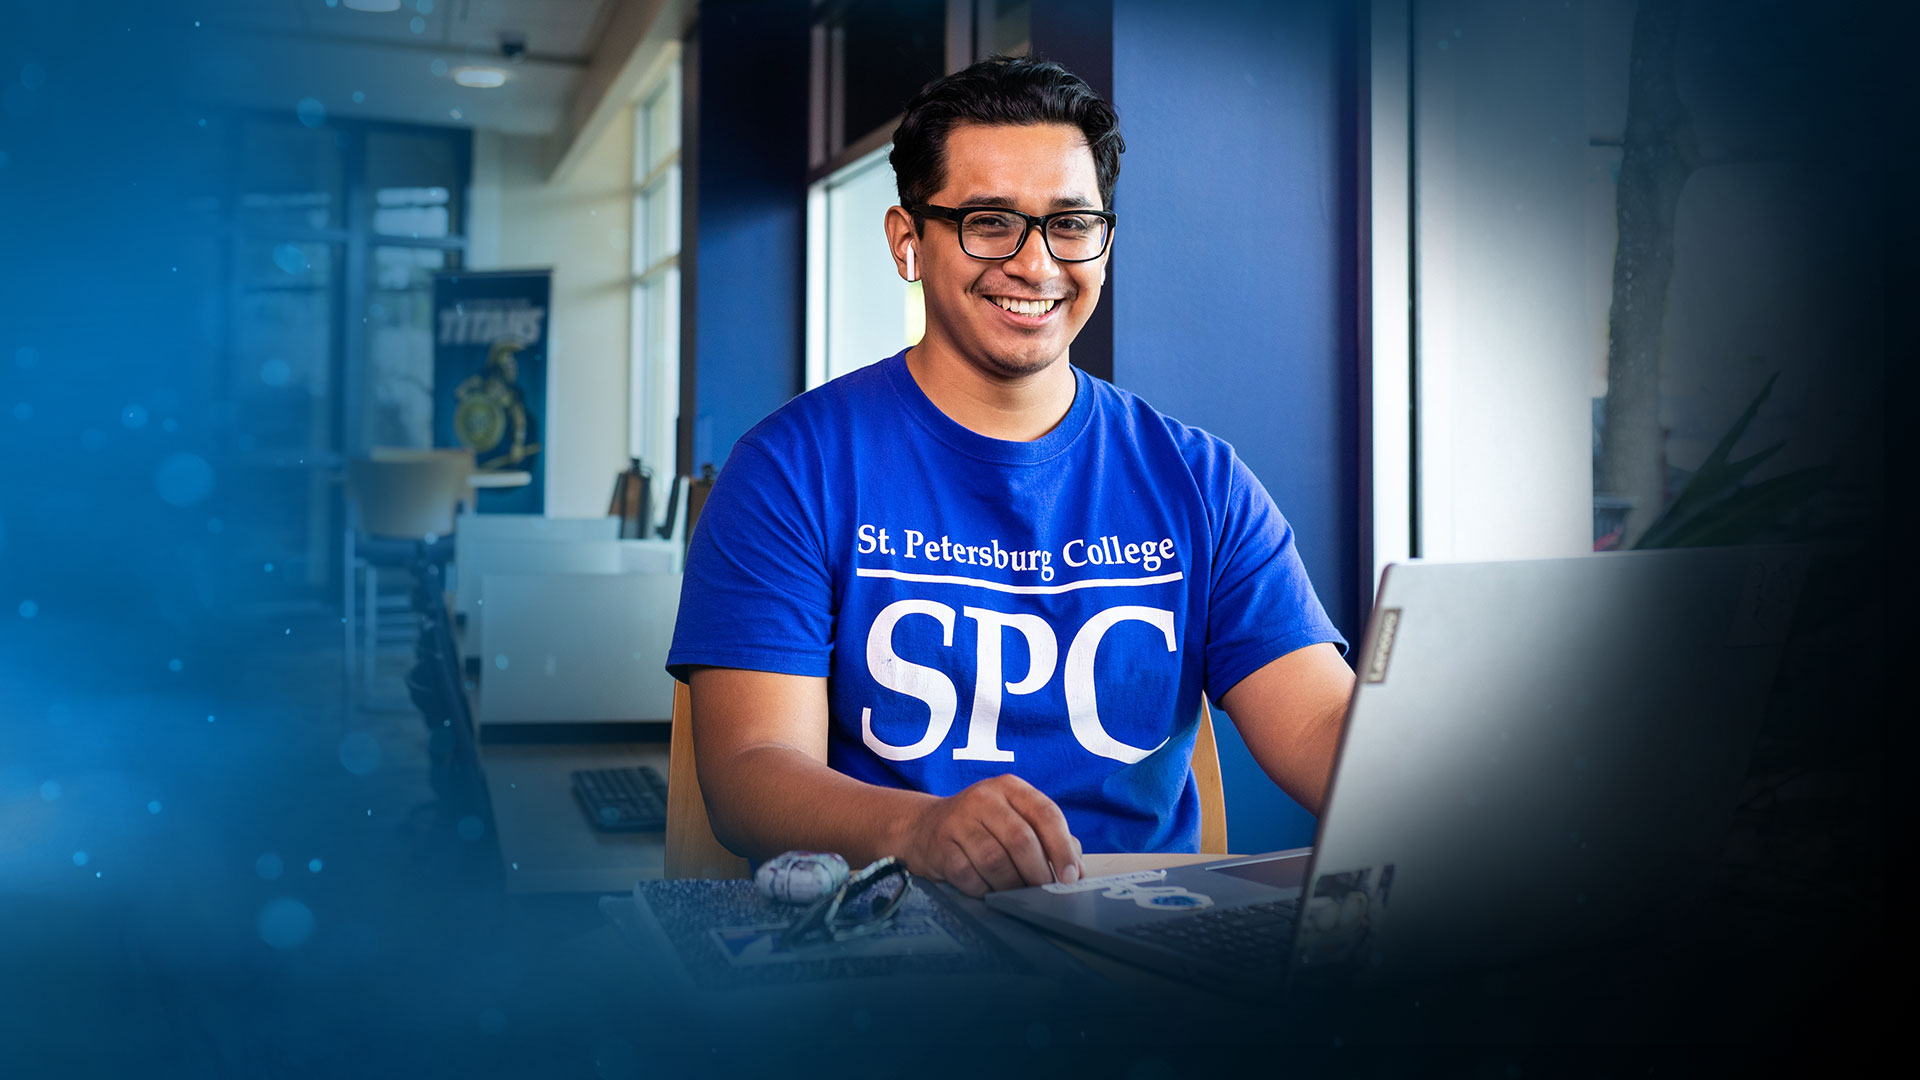 SPC student in blue shirt sitting at a computer smiling